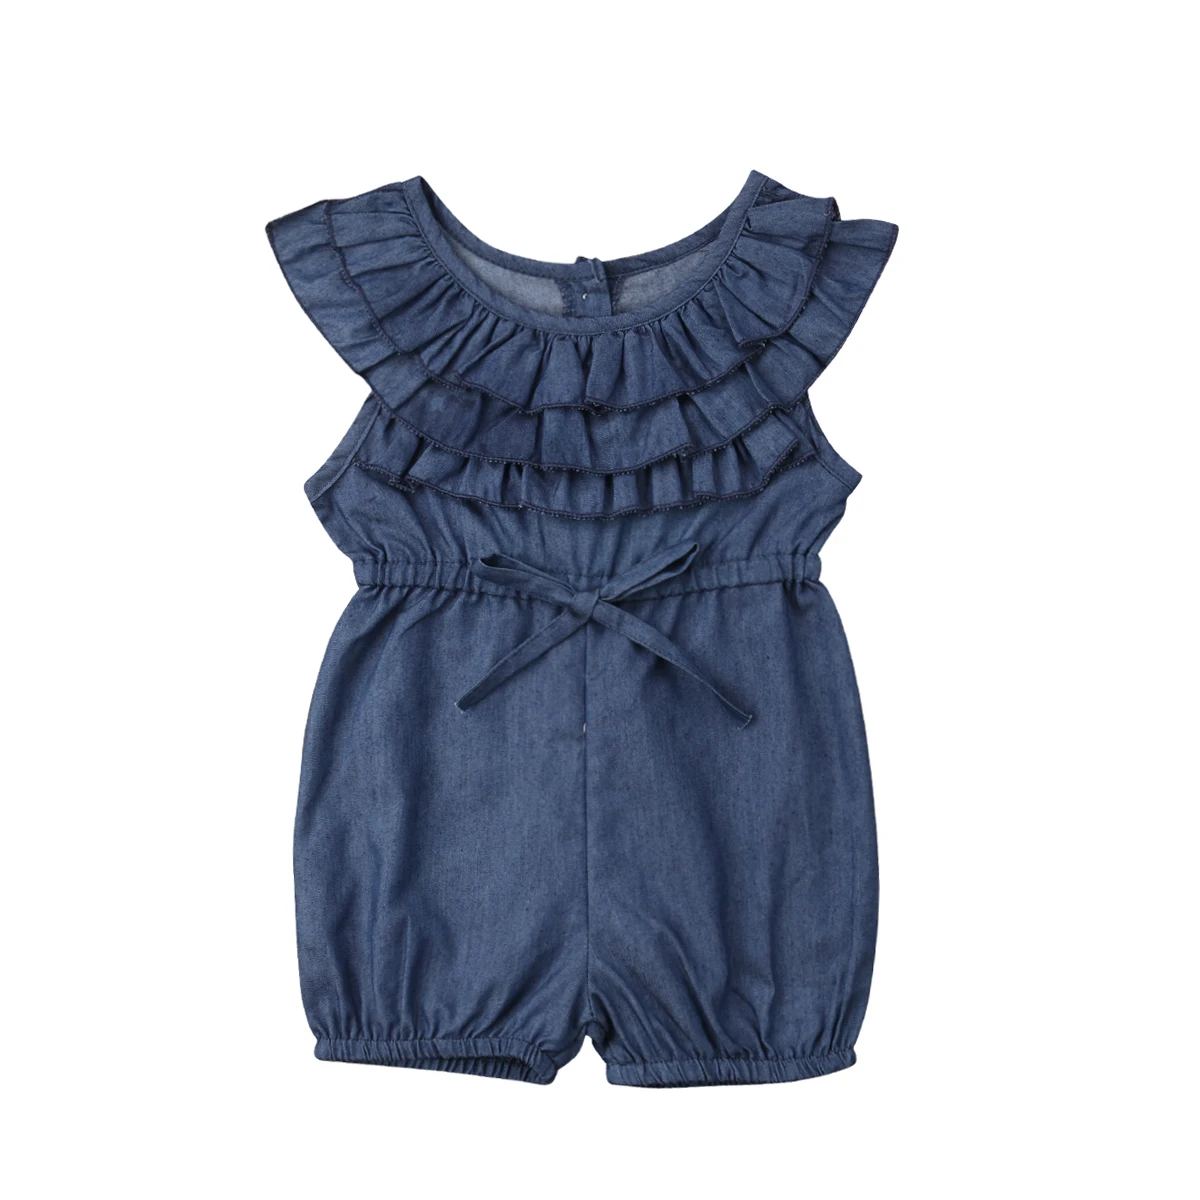 

Pudcoco 2021 Summer 6M-4Y Baby Girl Denim Multi Ruffled Neck Bow Back Buttons Romper Jumpsuit Children Kid Outfits Clothes